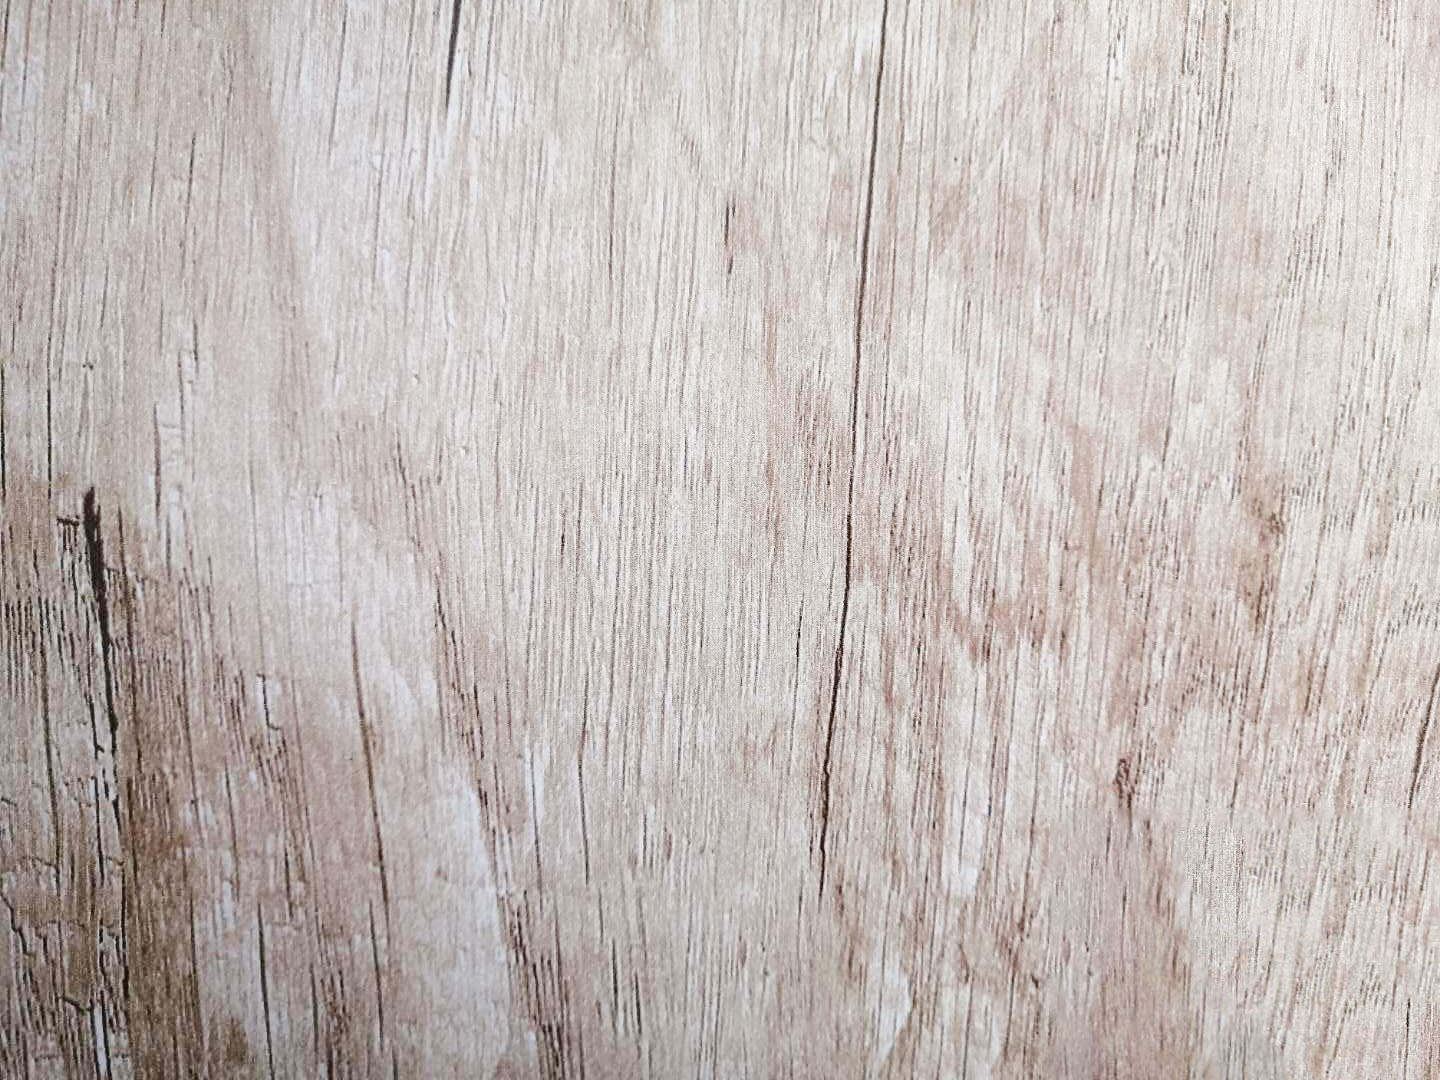 PAINT-FREE PLYWOOD